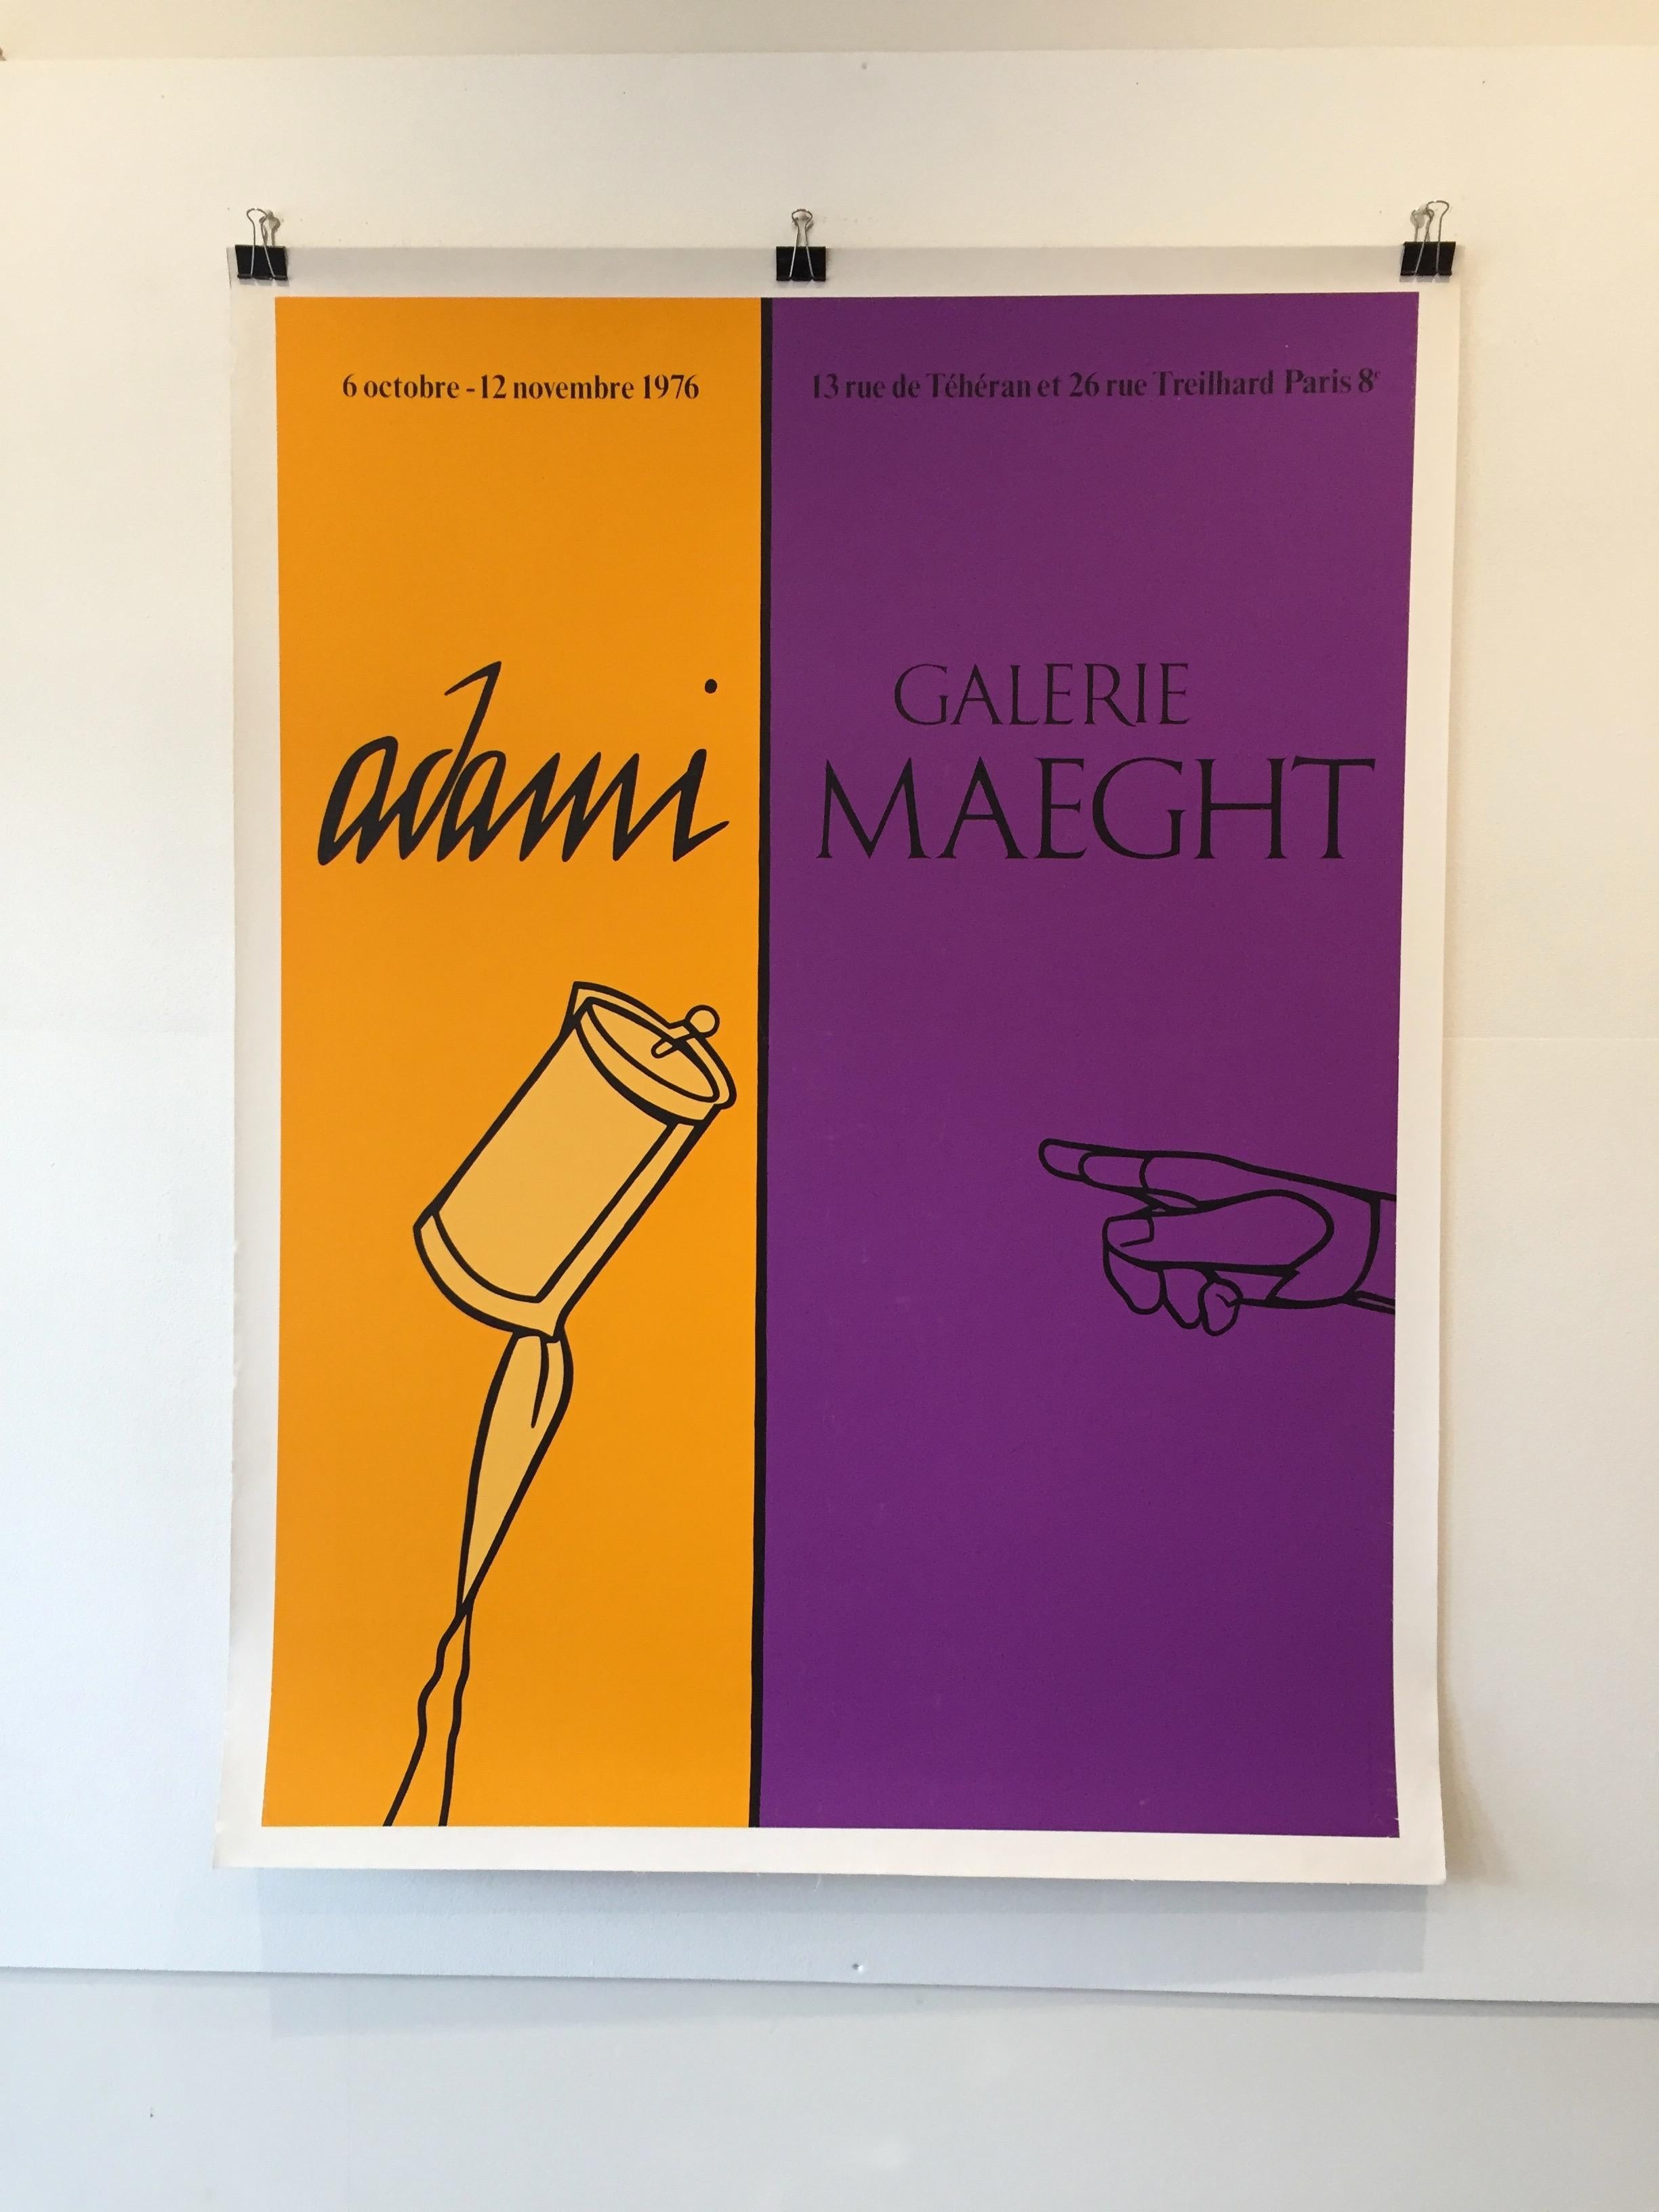 French Pop Art Exhibition Poster, 'Adami' 1976, Galerie Maeght For Sale